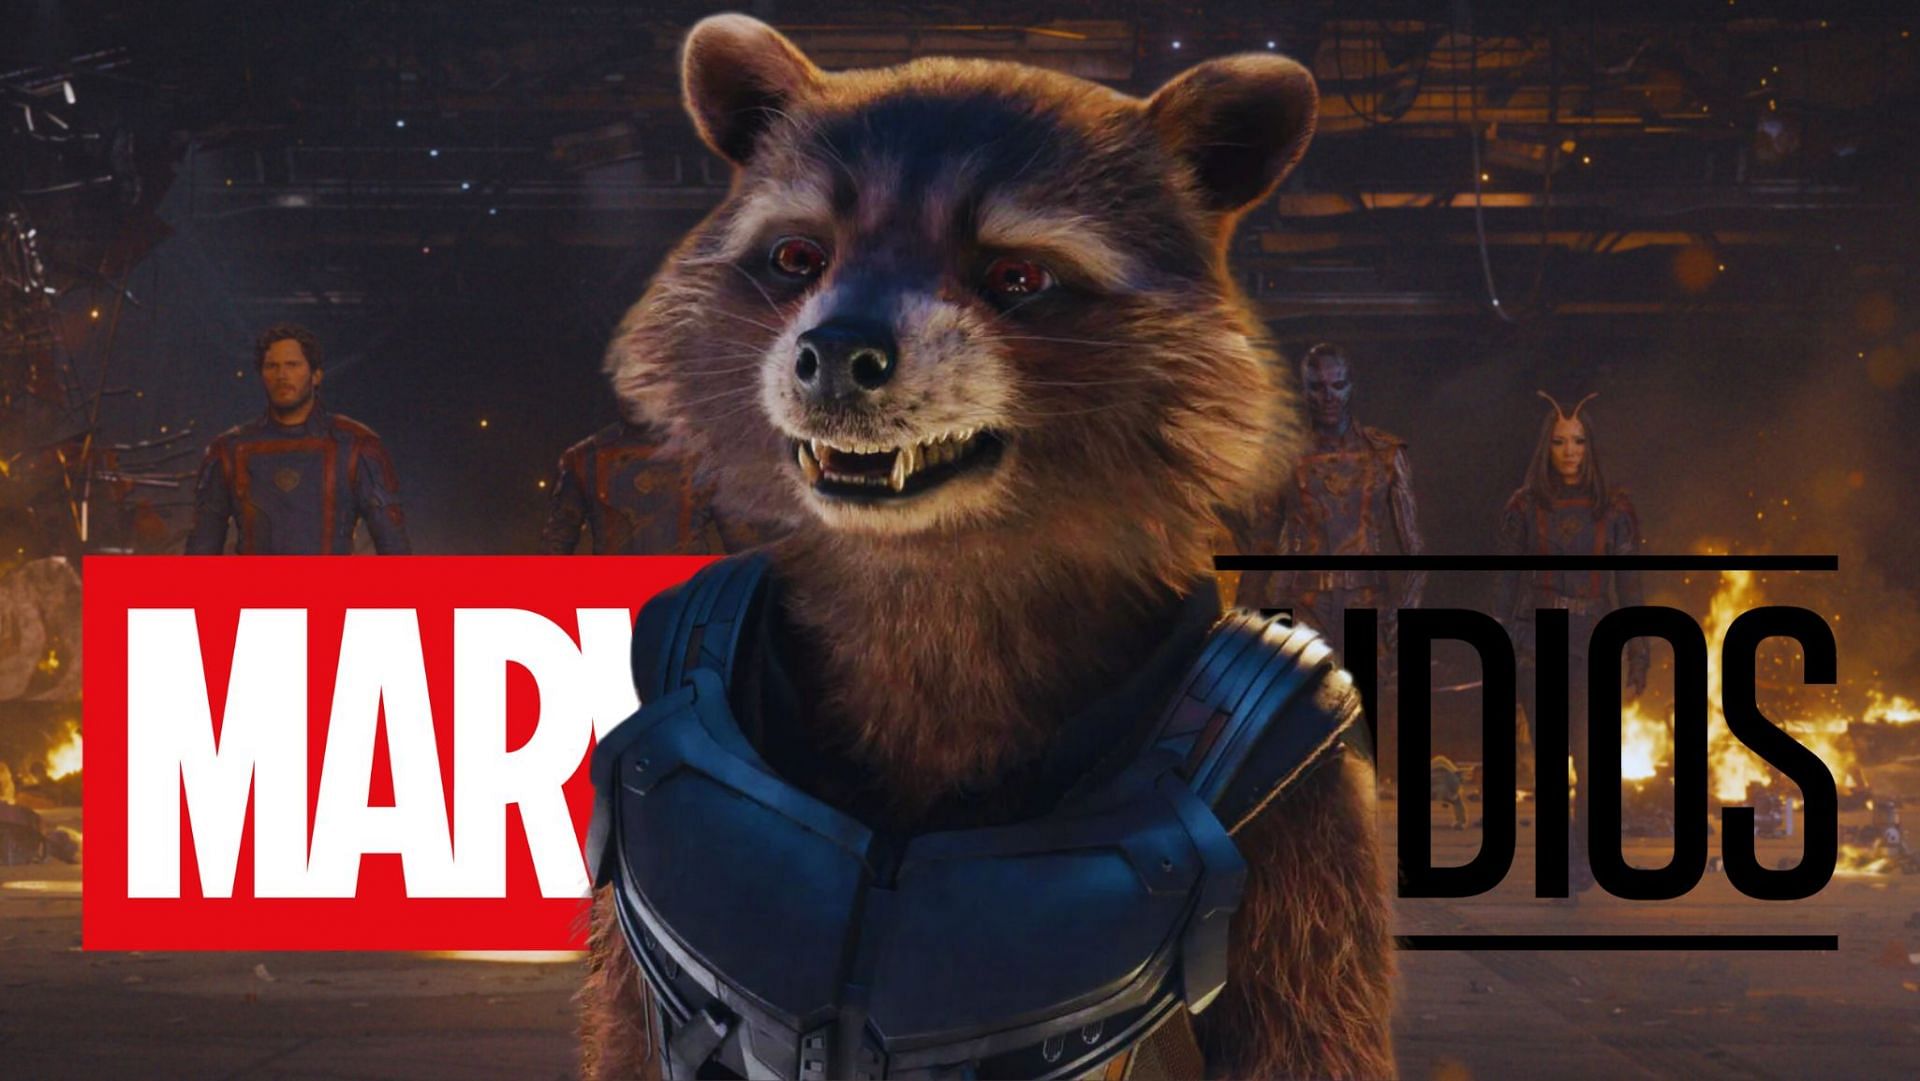 Rocket Raccoon gets a new voice in Guardians of the Galaxy Vol. 3 as multiple actors take on the role, bringing a fresh take to the beloved character (Image via Sportskeeda)